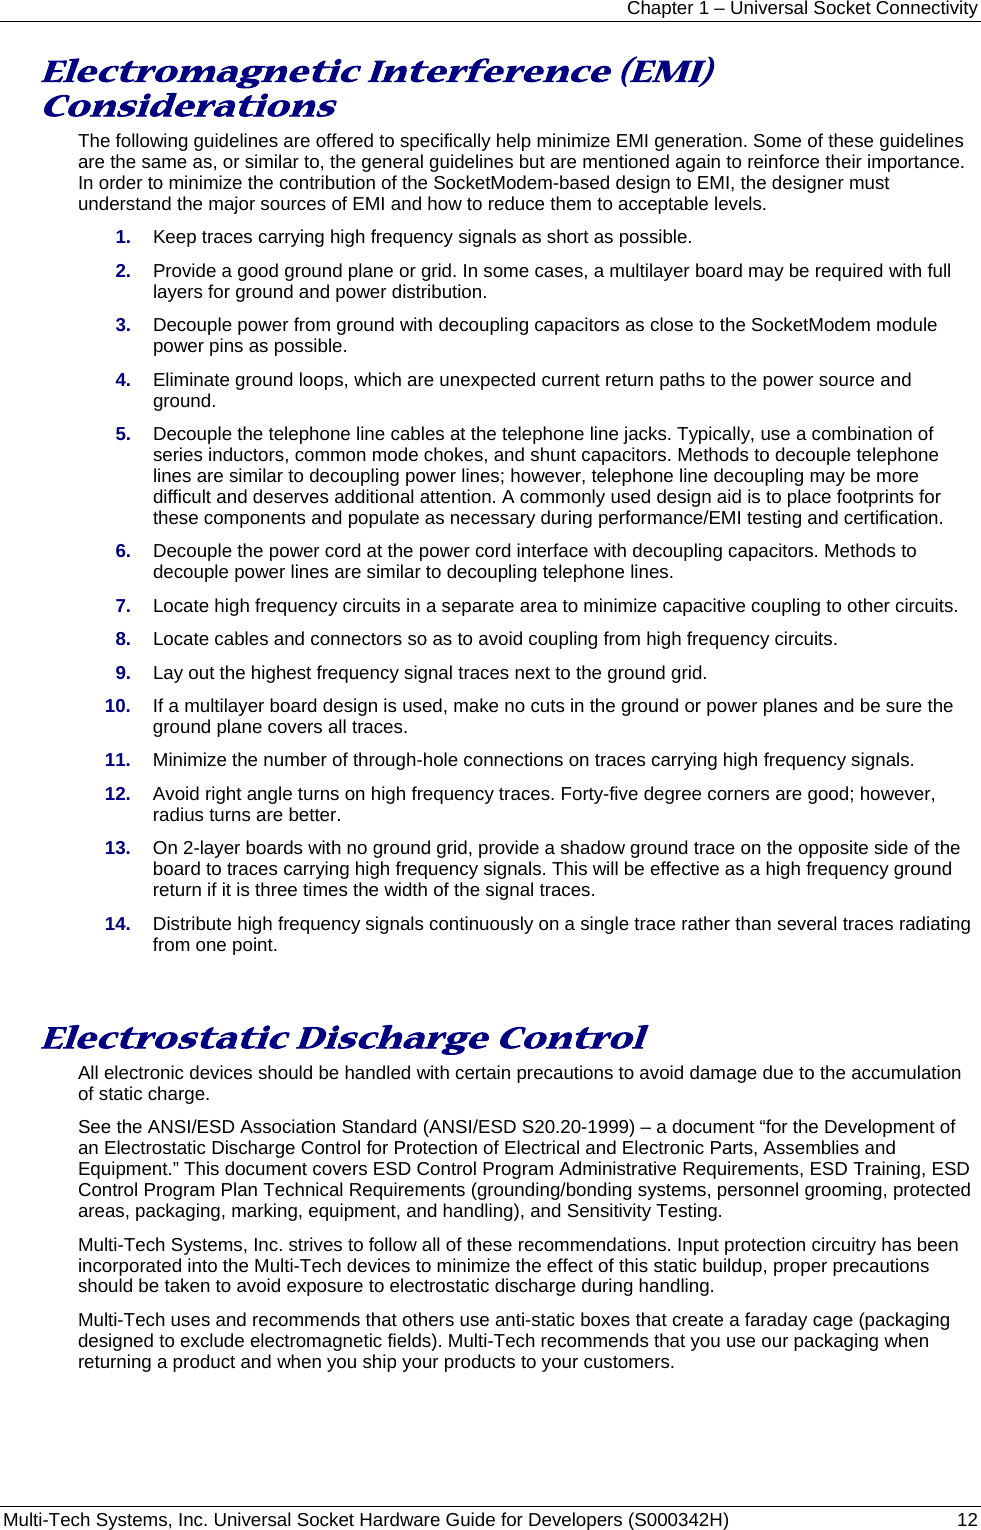 Chapter 1 – Universal Socket Connectivity Multi-Tech Systems, Inc. Universal Socket Hardware Guide for Developers (S000342H)  12  Electromagnetic Interference (EMI) Considerations The following guidelines are offered to specifically help minimize EMI generation. Some of these guidelines are the same as, or similar to, the general guidelines but are mentioned again to reinforce their importance. In order to minimize the contribution of the SocketModem-based design to EMI, the designer must understand the major sources of EMI and how to reduce them to acceptable levels.  1.  Keep traces carrying high frequency signals as short as possible. 2.  Provide a good ground plane or grid. In some cases, a multilayer board may be required with full layers for ground and power distribution. 3.  Decouple power from ground with decoupling capacitors as close to the SocketModem module power pins as possible. 4.  Eliminate ground loops, which are unexpected current return paths to the power source and ground. 5.  Decouple the telephone line cables at the telephone line jacks. Typically, use a combination of series inductors, common mode chokes, and shunt capacitors. Methods to decouple telephone lines are similar to decoupling power lines; however, telephone line decoupling may be more difficult and deserves additional attention. A commonly used design aid is to place footprints for these components and populate as necessary during performance/EMI testing and certification. 6.  Decouple the power cord at the power cord interface with decoupling capacitors. Methods to decouple power lines are similar to decoupling telephone lines. 7.  Locate high frequency circuits in a separate area to minimize capacitive coupling to other circuits. 8.  Locate cables and connectors so as to avoid coupling from high frequency circuits. 9.  Lay out the highest frequency signal traces next to the ground grid. 10.  If a multilayer board design is used, make no cuts in the ground or power planes and be sure the ground plane covers all traces. 11.  Minimize the number of through-hole connections on traces carrying high frequency signals. 12.  Avoid right angle turns on high frequency traces. Forty-five degree corners are good; however, radius turns are better. 13.  On 2-layer boards with no ground grid, provide a shadow ground trace on the opposite side of the board to traces carrying high frequency signals. This will be effective as a high frequency ground return if it is three times the width of the signal traces. 14.  Distribute high frequency signals continuously on a single trace rather than several traces radiating from one point.   Electrostatic Discharge Control All electronic devices should be handled with certain precautions to avoid damage due to the accumulation of static charge.  See the ANSI/ESD Association Standard (ANSI/ESD S20.20-1999) – a document “for the Development of an Electrostatic Discharge Control for Protection of Electrical and Electronic Parts, Assemblies and Equipment.” This document covers ESD Control Program Administrative Requirements, ESD Training, ESD Control Program Plan Technical Requirements (grounding/bonding systems, personnel grooming, protected areas, packaging, marking, equipment, and handling), and Sensitivity Testing. Multi-Tech Systems, Inc. strives to follow all of these recommendations. Input protection circuitry has been incorporated into the Multi-Tech devices to minimize the effect of this static buildup, proper precautions should be taken to avoid exposure to electrostatic discharge during handling.  Multi-Tech uses and recommends that others use anti-static boxes that create a faraday cage (packaging designed to exclude electromagnetic fields). Multi-Tech recommends that you use our packaging when returning a product and when you ship your products to your customers. 